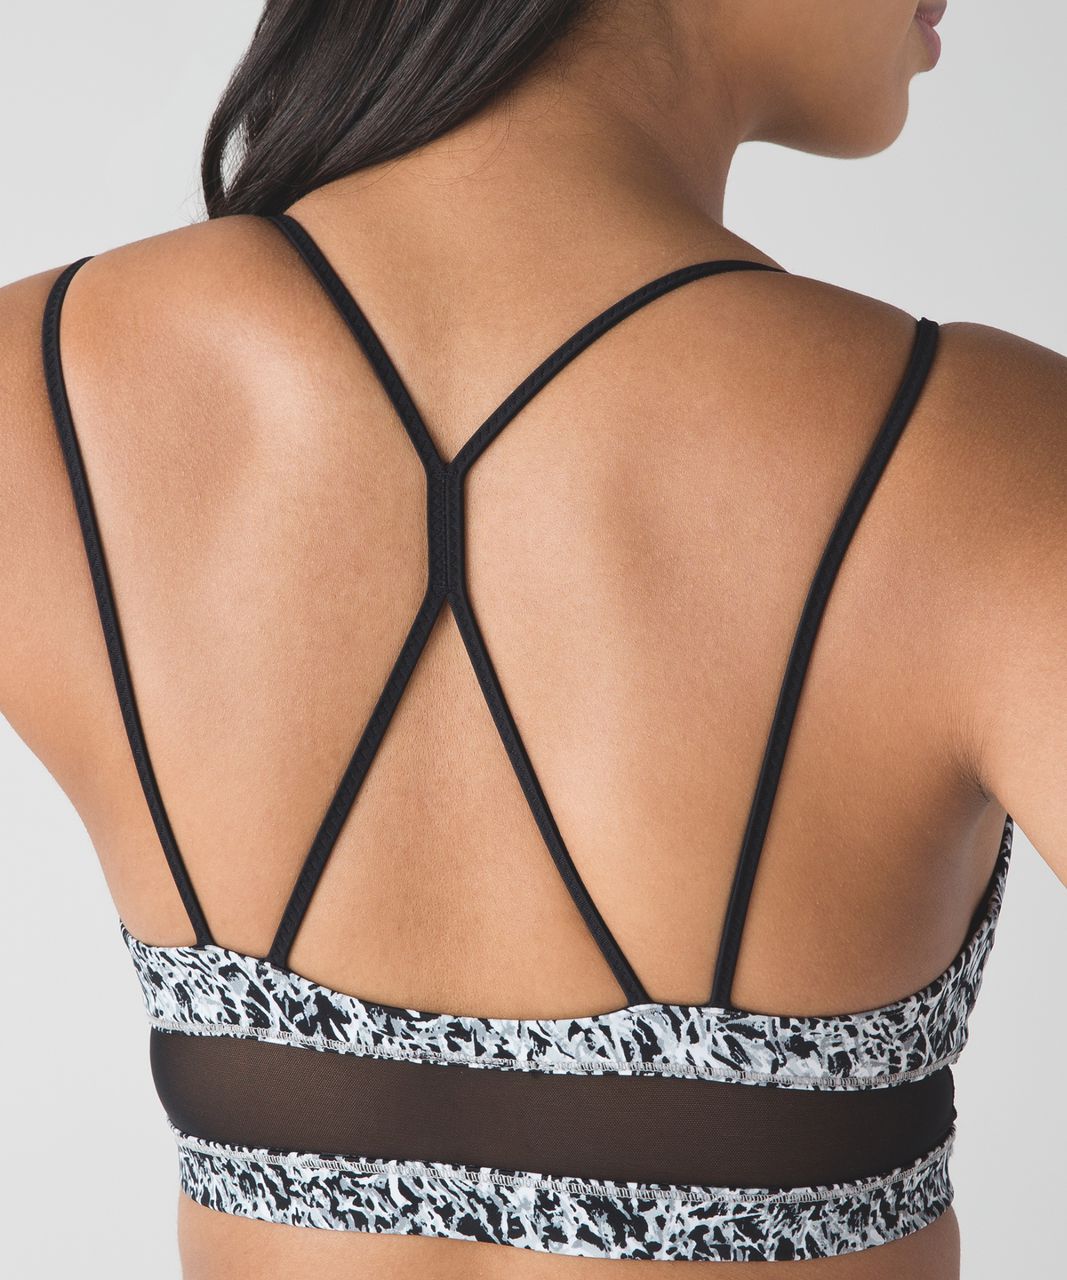 Lululemon Go With The Flow Top - Mini Ripple White Seal Grey / Black